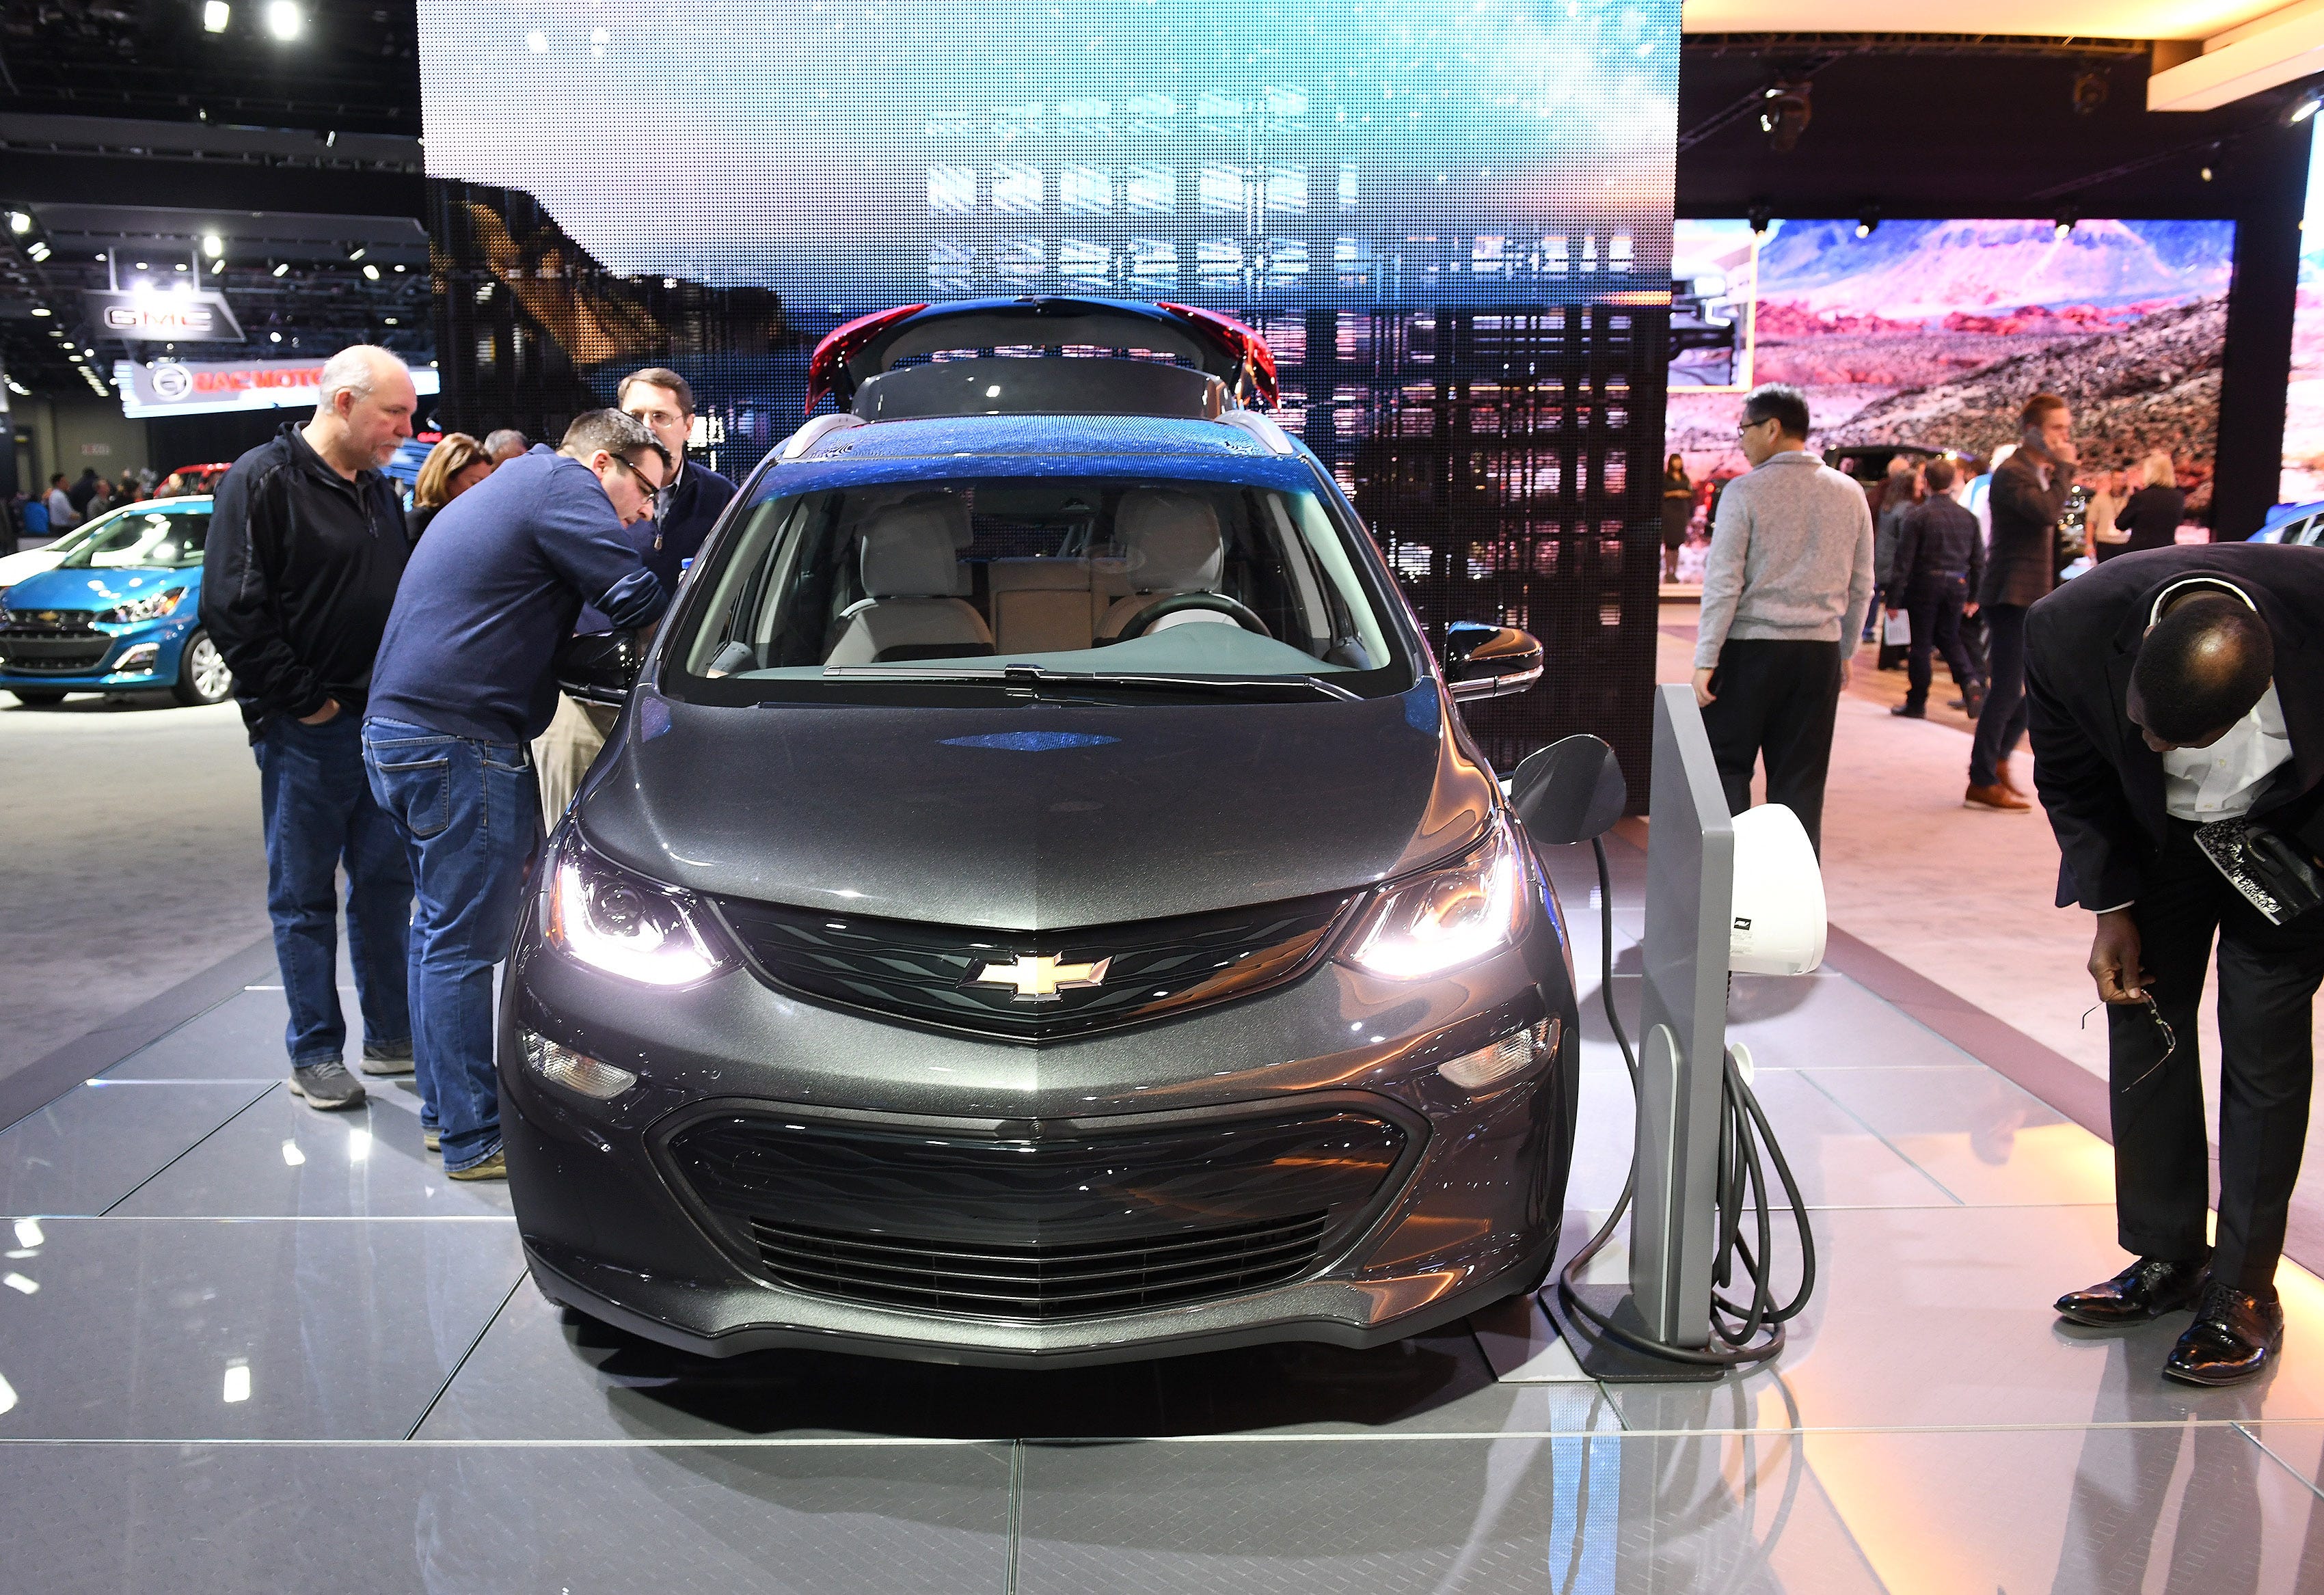 People check out the 2019 Chevrolet Bolt EV at the North American International Auto Show at Cobo Center in Detroit on Jan. 17, 2019.